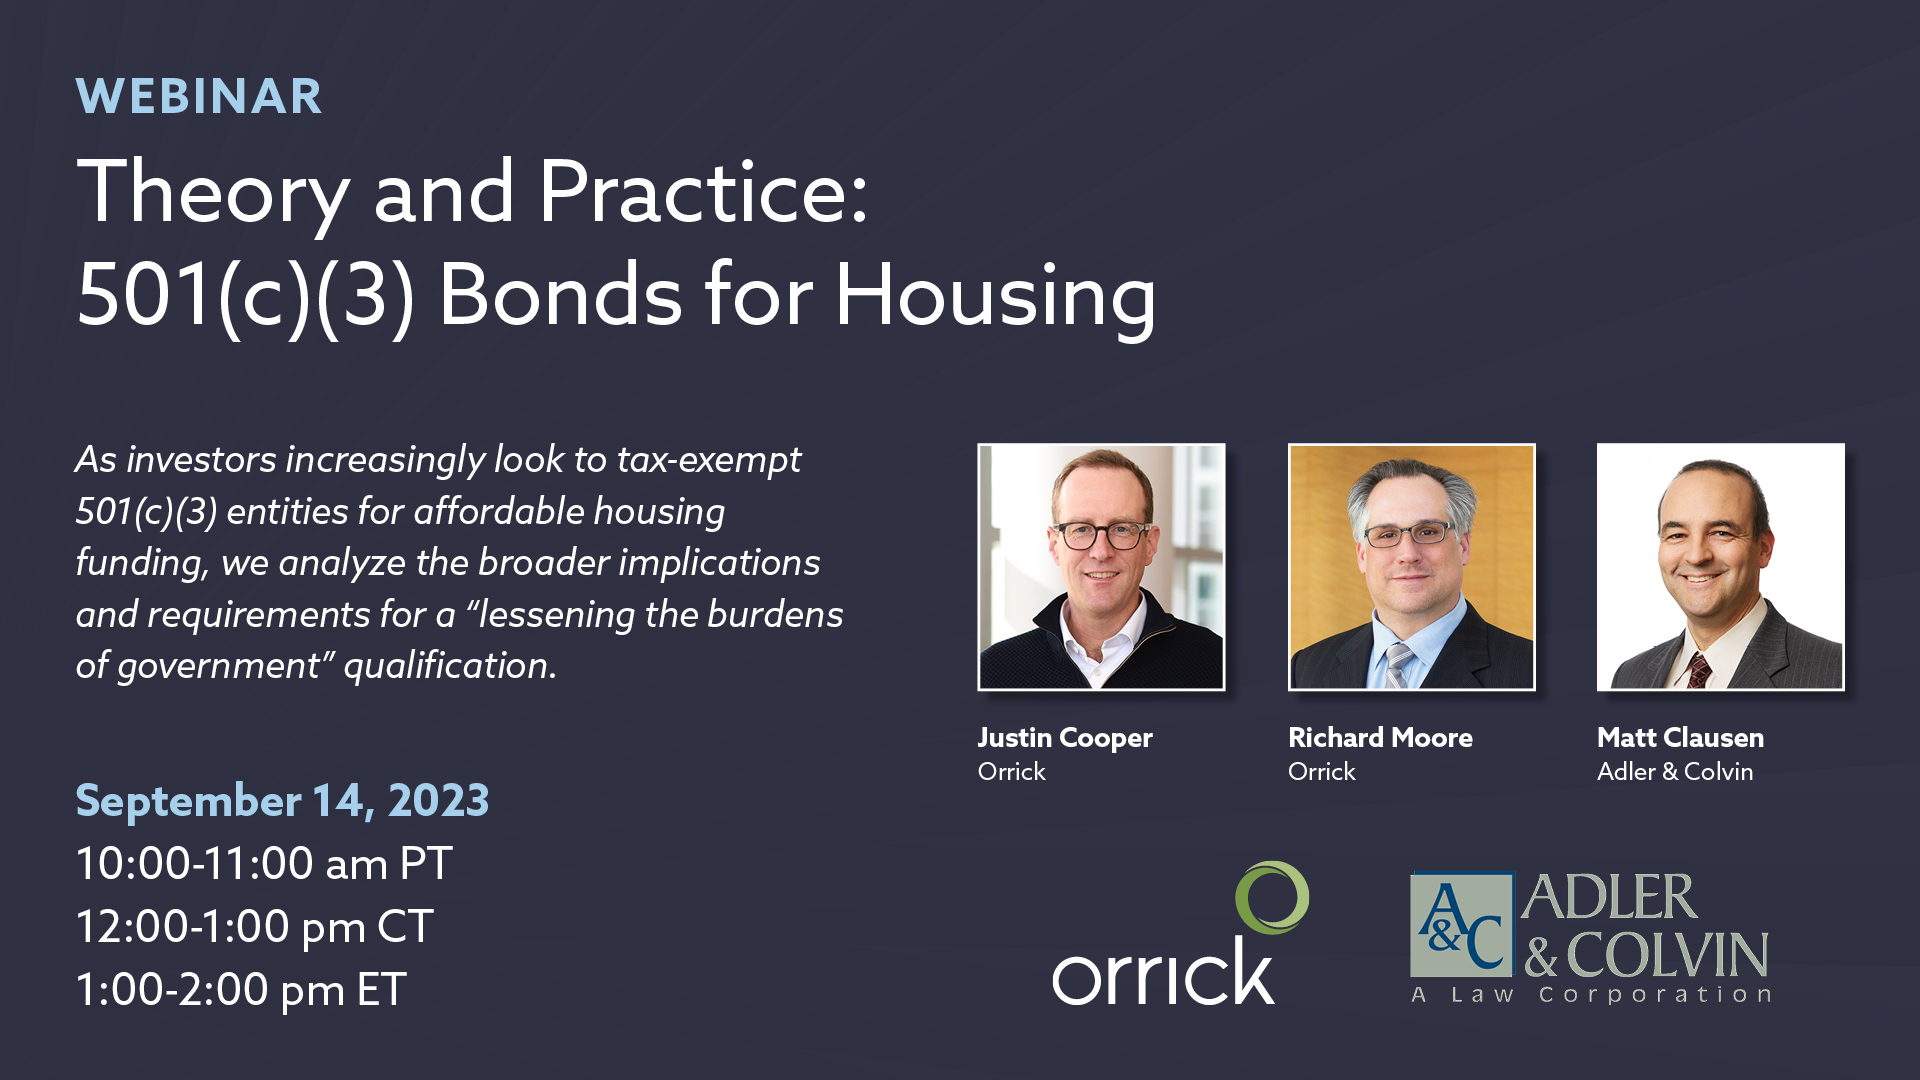 Theory and Practice: 501(c)(3) Bonds for Housing